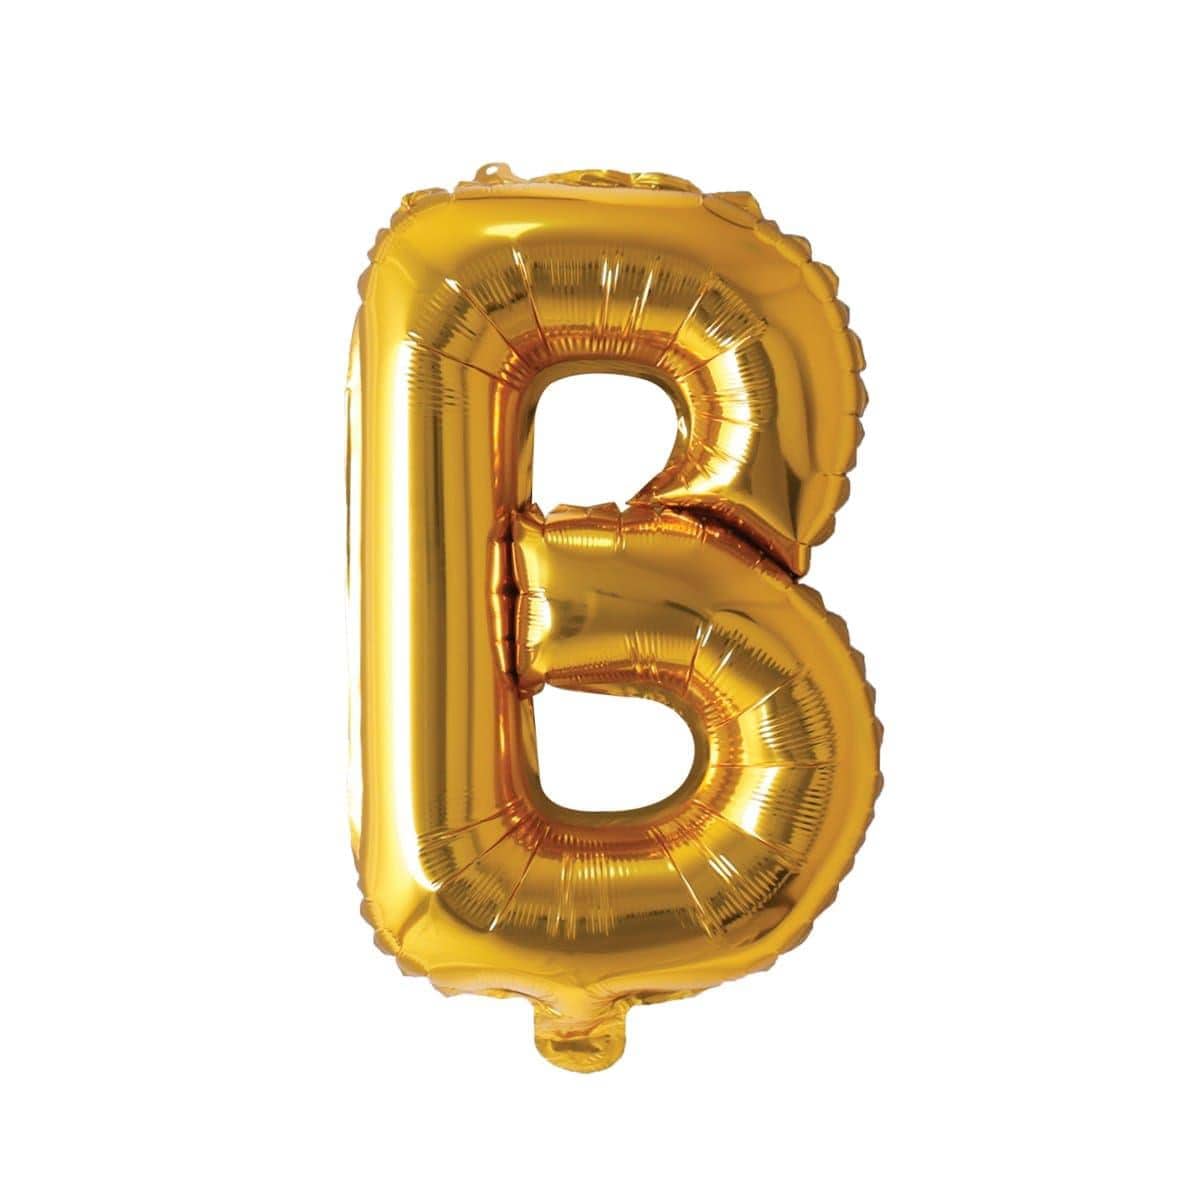 Buy Balloons Gold Letter B Foil Balloon, 16 Inches sold at Party Expert